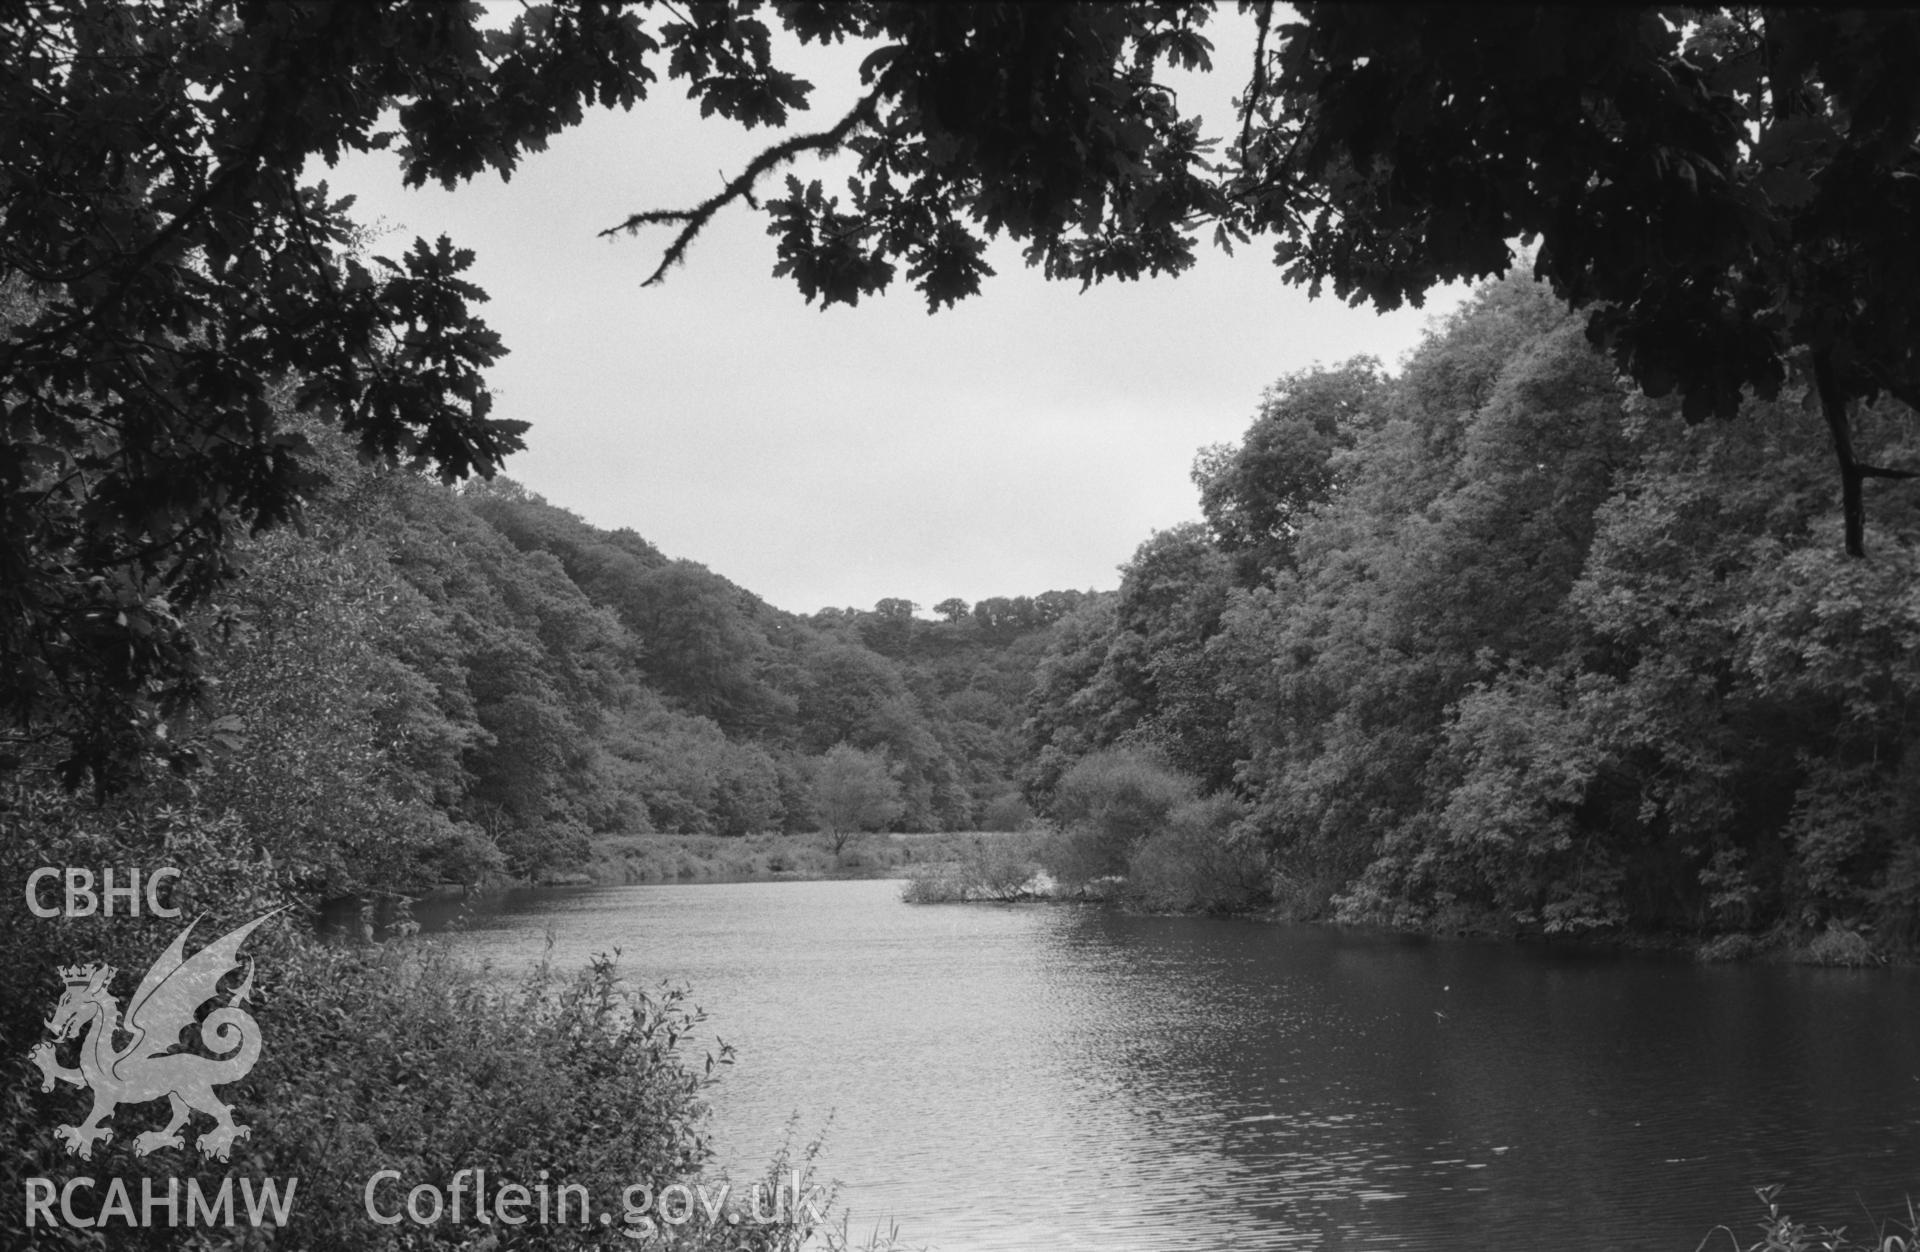 Digital copy of a black and white negative showing view up the Teifi from Cwm Du on the east banks 1.5km north of Cilgerran. Photographed by Arthur O. Chater in September 1964 from Grid Reference SN 1943 4447, looking west south west.